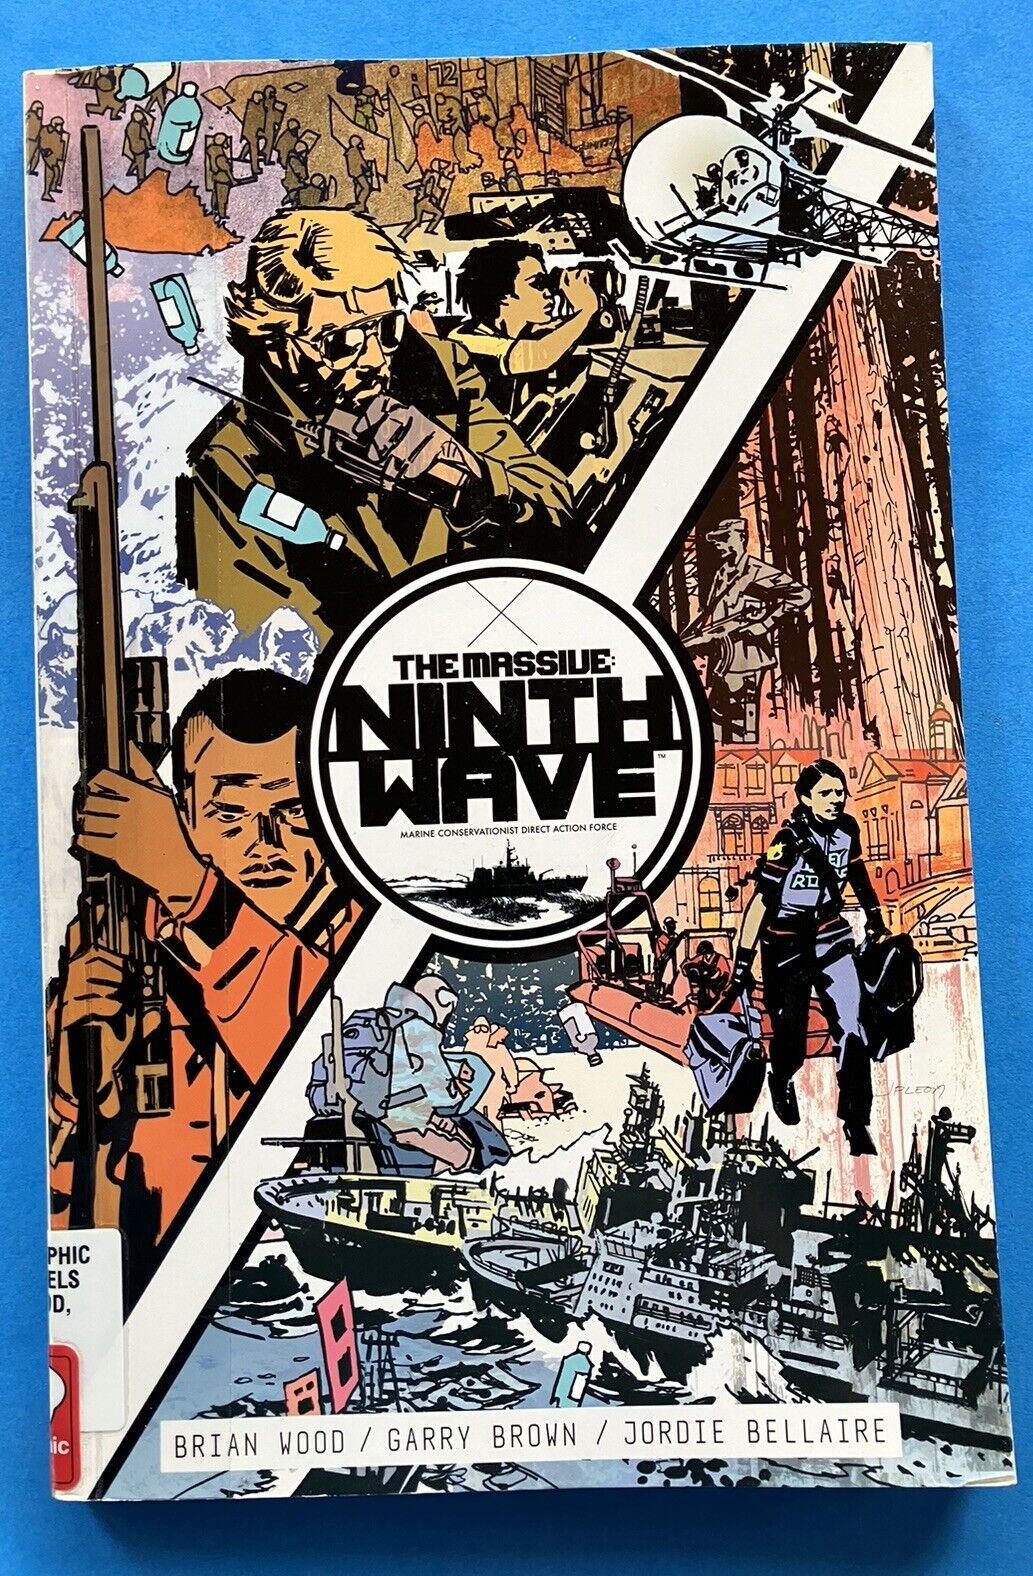 The Massive: Ninth Wave Volume 1 by Brian Wood: 2017 Dark Horse - Ex-library